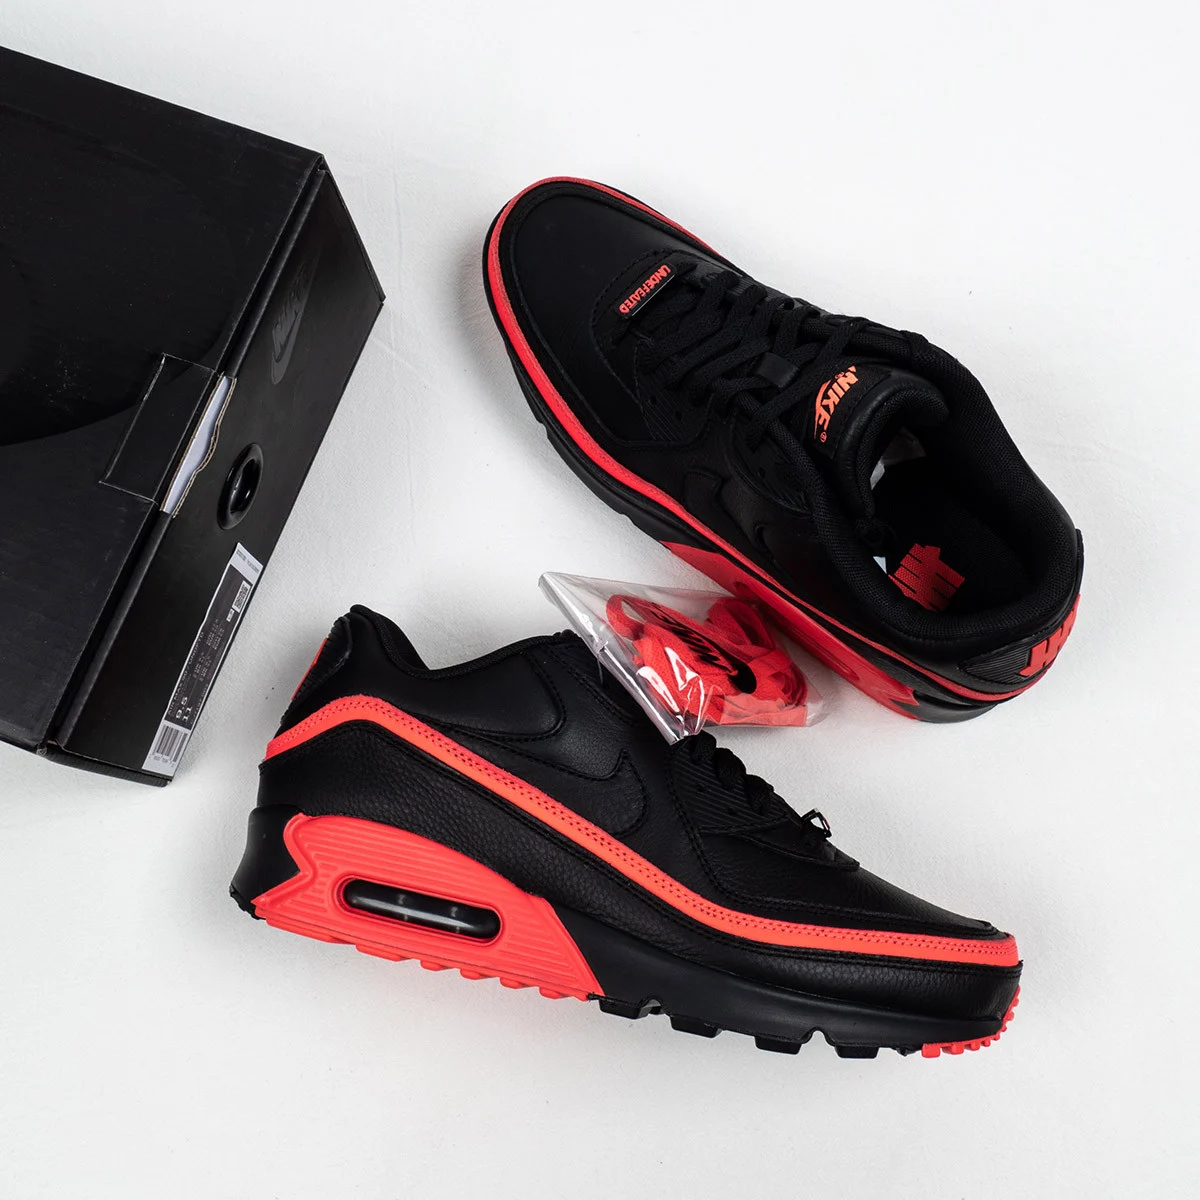 Undefeated x Nike Air Max 90 Black Solar Red For Sale